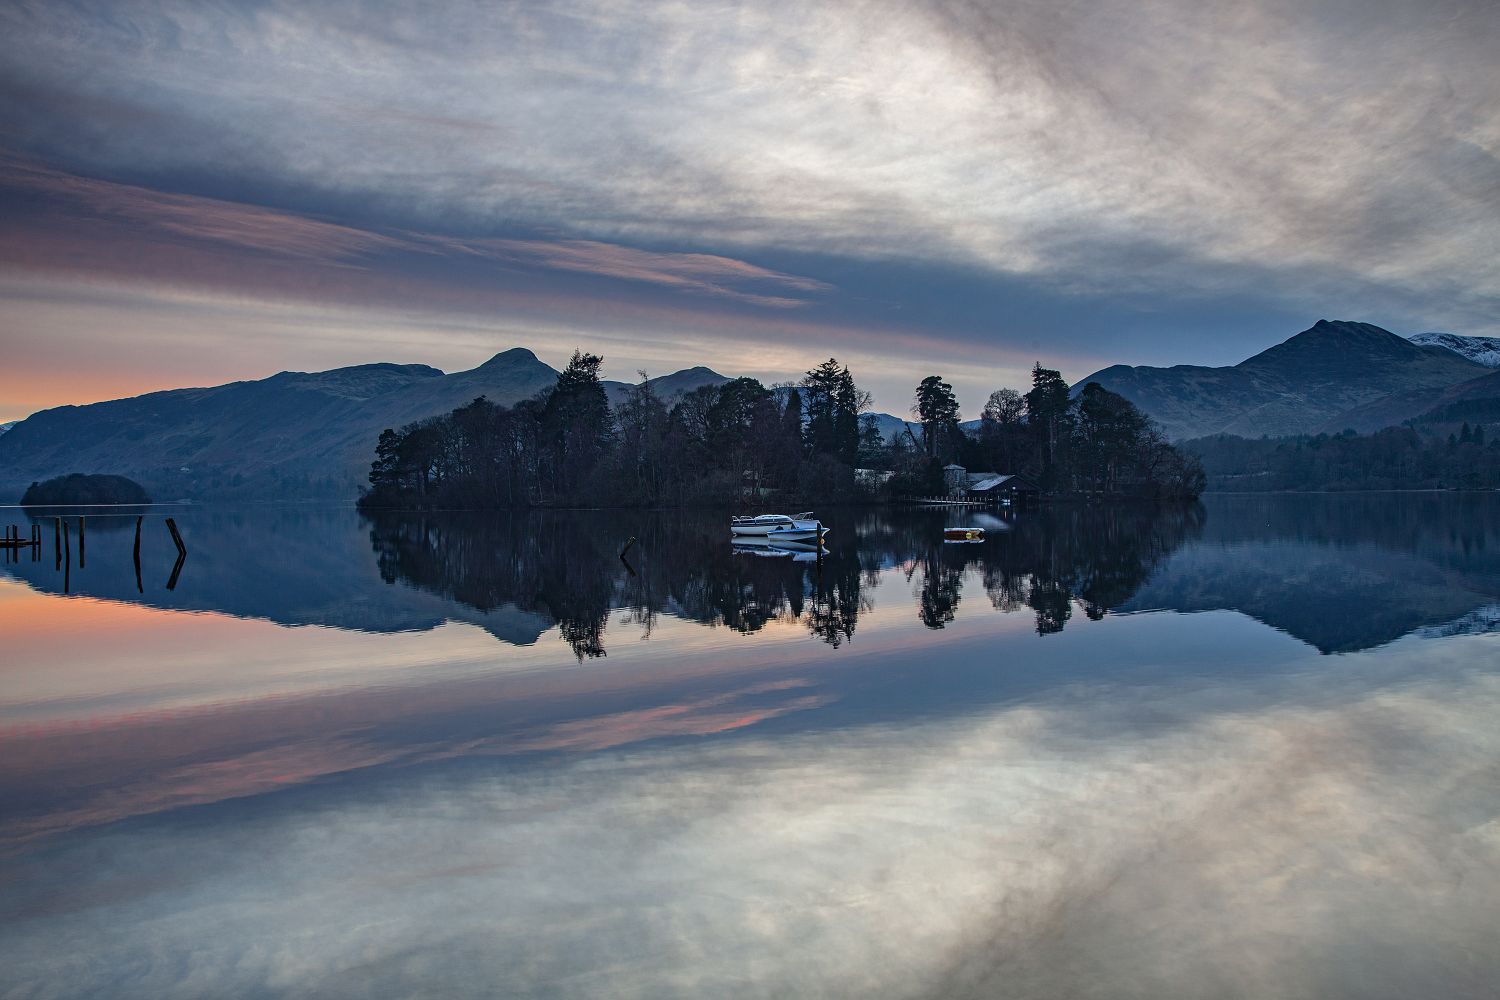 Cloud reflections on Derwentwater by Martin Lawrence